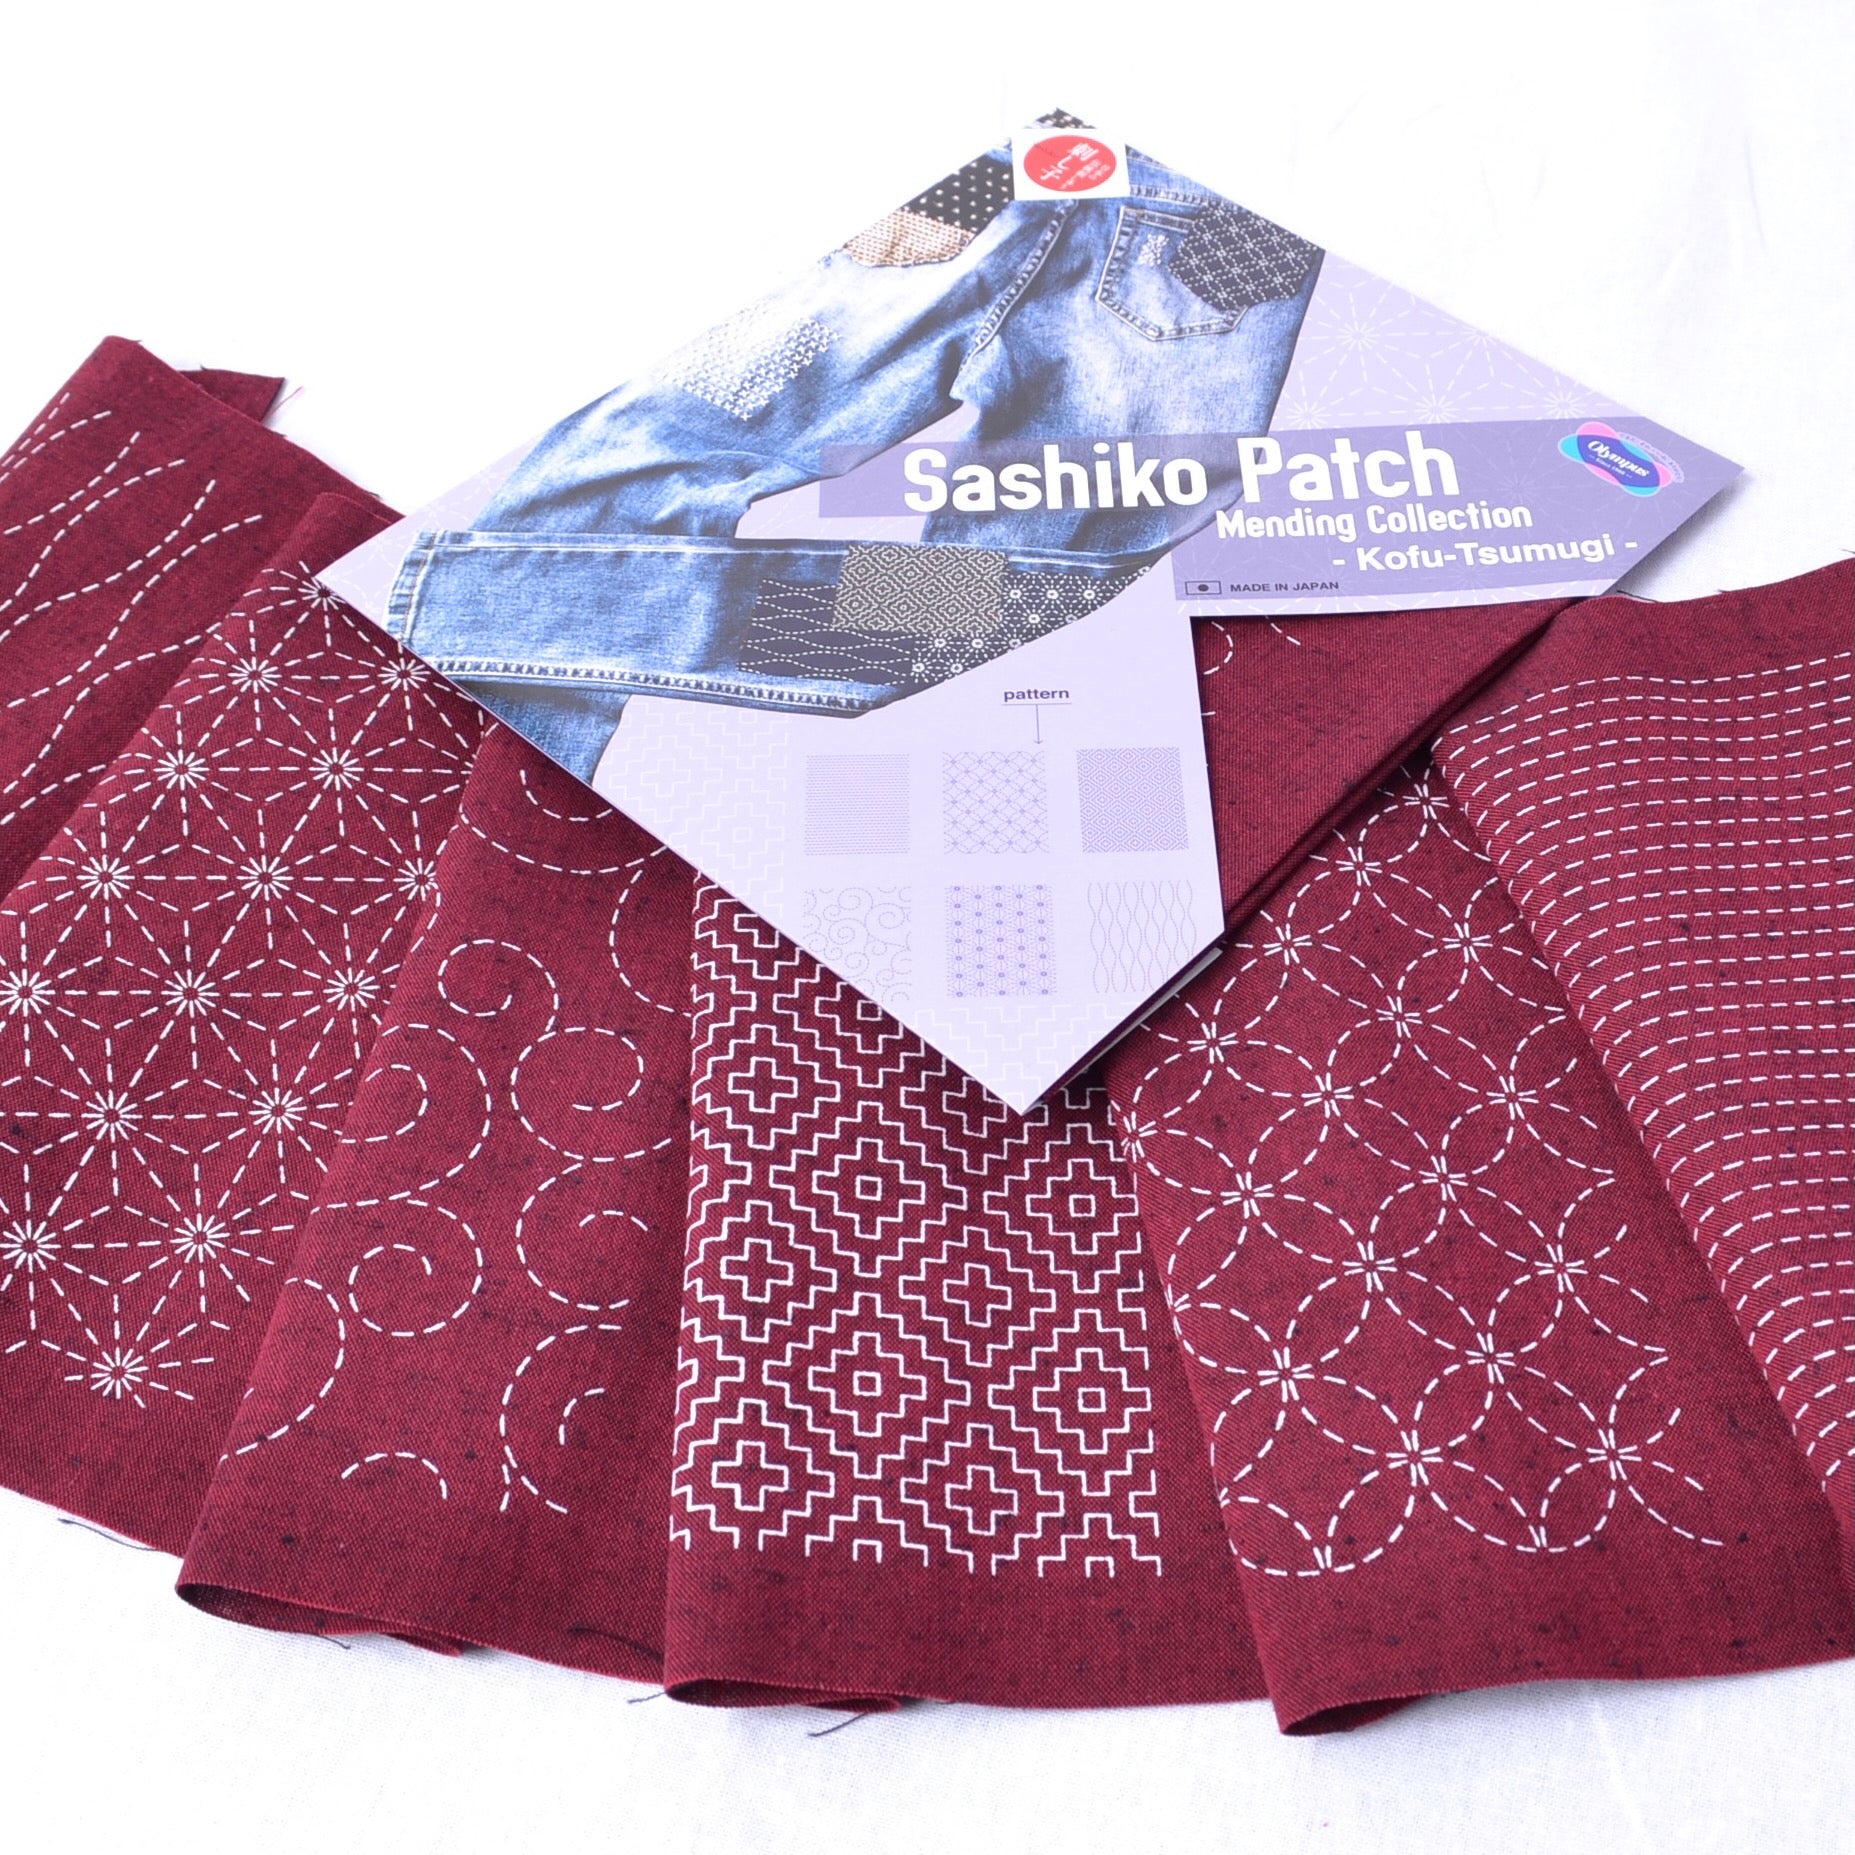 Sashiko Patch for mending, in red